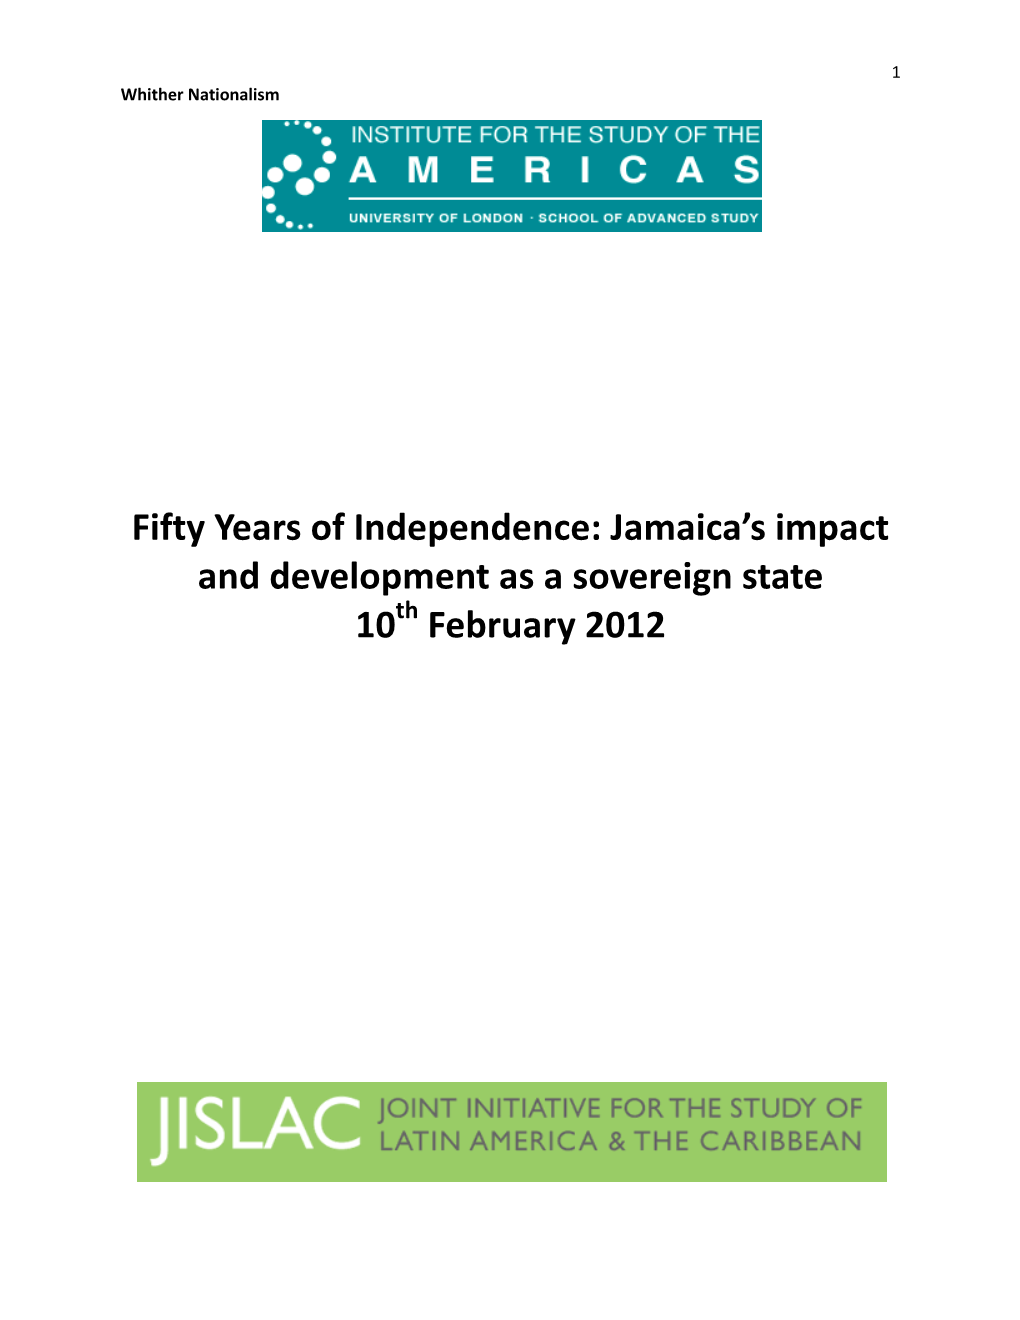 Fifty Years of Independence: Jamaica's Impact and Development